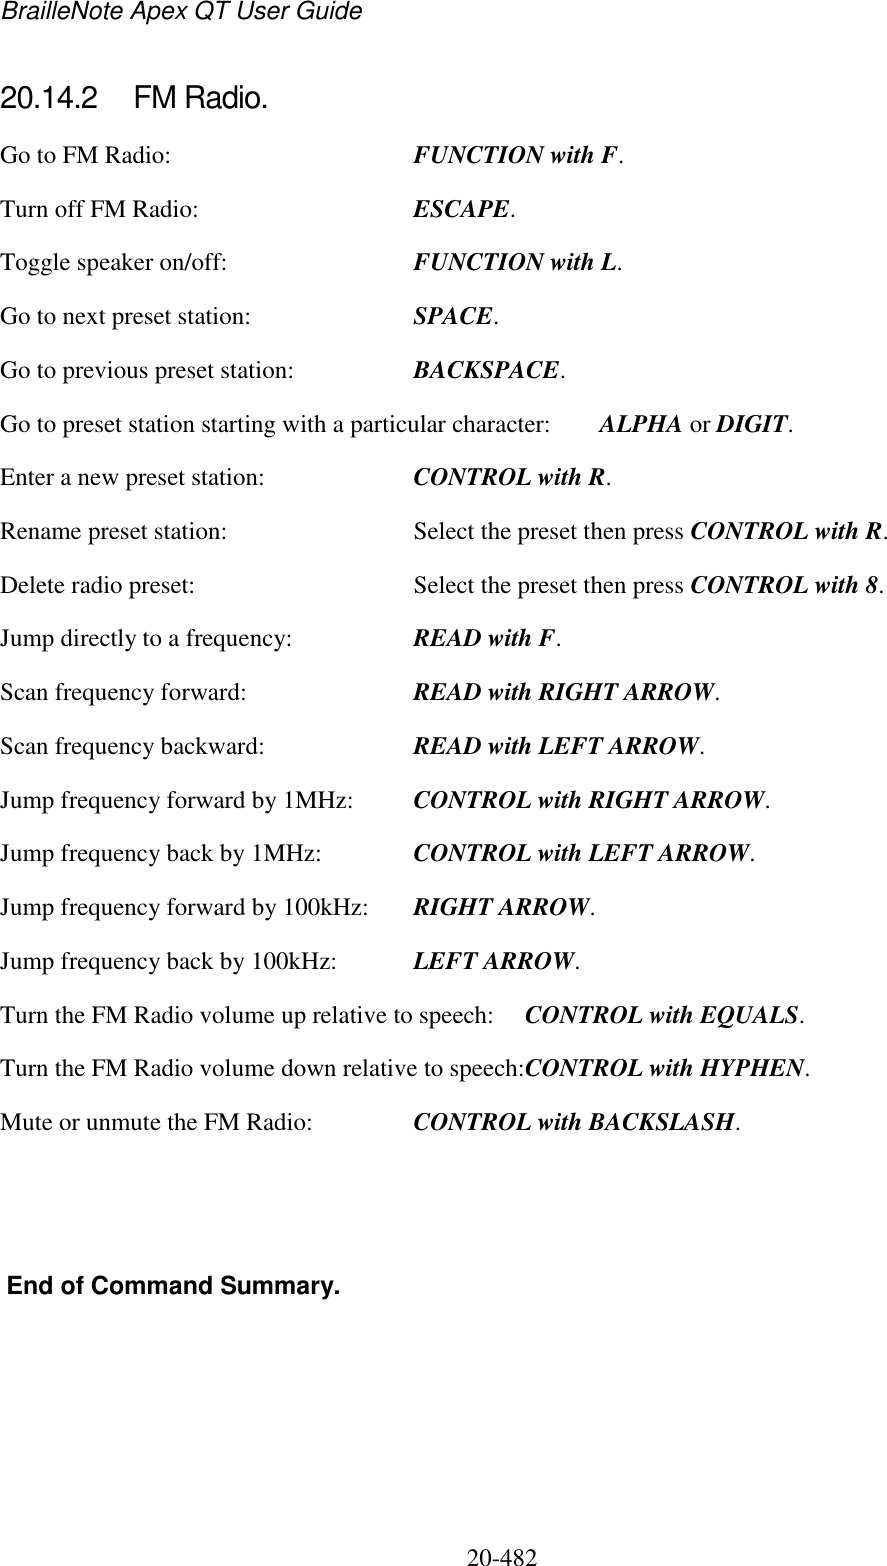 BrailleNote Apex QT User Guide  20-482   20.14.2  FM Radio. Go to FM Radio:  FUNCTION with F. Turn off FM Radio:  ESCAPE. Toggle speaker on/off:  FUNCTION with L. Go to next preset station:  SPACE. Go to previous preset station:  BACKSPACE. Go to preset station starting with a particular character:  ALPHA or DIGIT. Enter a new preset station:  CONTROL with R. Rename preset station:  Select the preset then press CONTROL with R.   Delete radio preset:  Select the preset then press CONTROL with 8. Jump directly to a frequency:  READ with F. Scan frequency forward:  READ with RIGHT ARROW. Scan frequency backward:  READ with LEFT ARROW. Jump frequency forward by 1MHz:  CONTROL with RIGHT ARROW. Jump frequency back by 1MHz:  CONTROL with LEFT ARROW. Jump frequency forward by 100kHz:  RIGHT ARROW. Jump frequency back by 100kHz:  LEFT ARROW. Turn the FM Radio volume up relative to speech:  CONTROL with EQUALS. Turn the FM Radio volume down relative to speech:CONTROL with HYPHEN. Mute or unmute the FM Radio:  CONTROL with BACKSLASH.           End of Command Summary.  